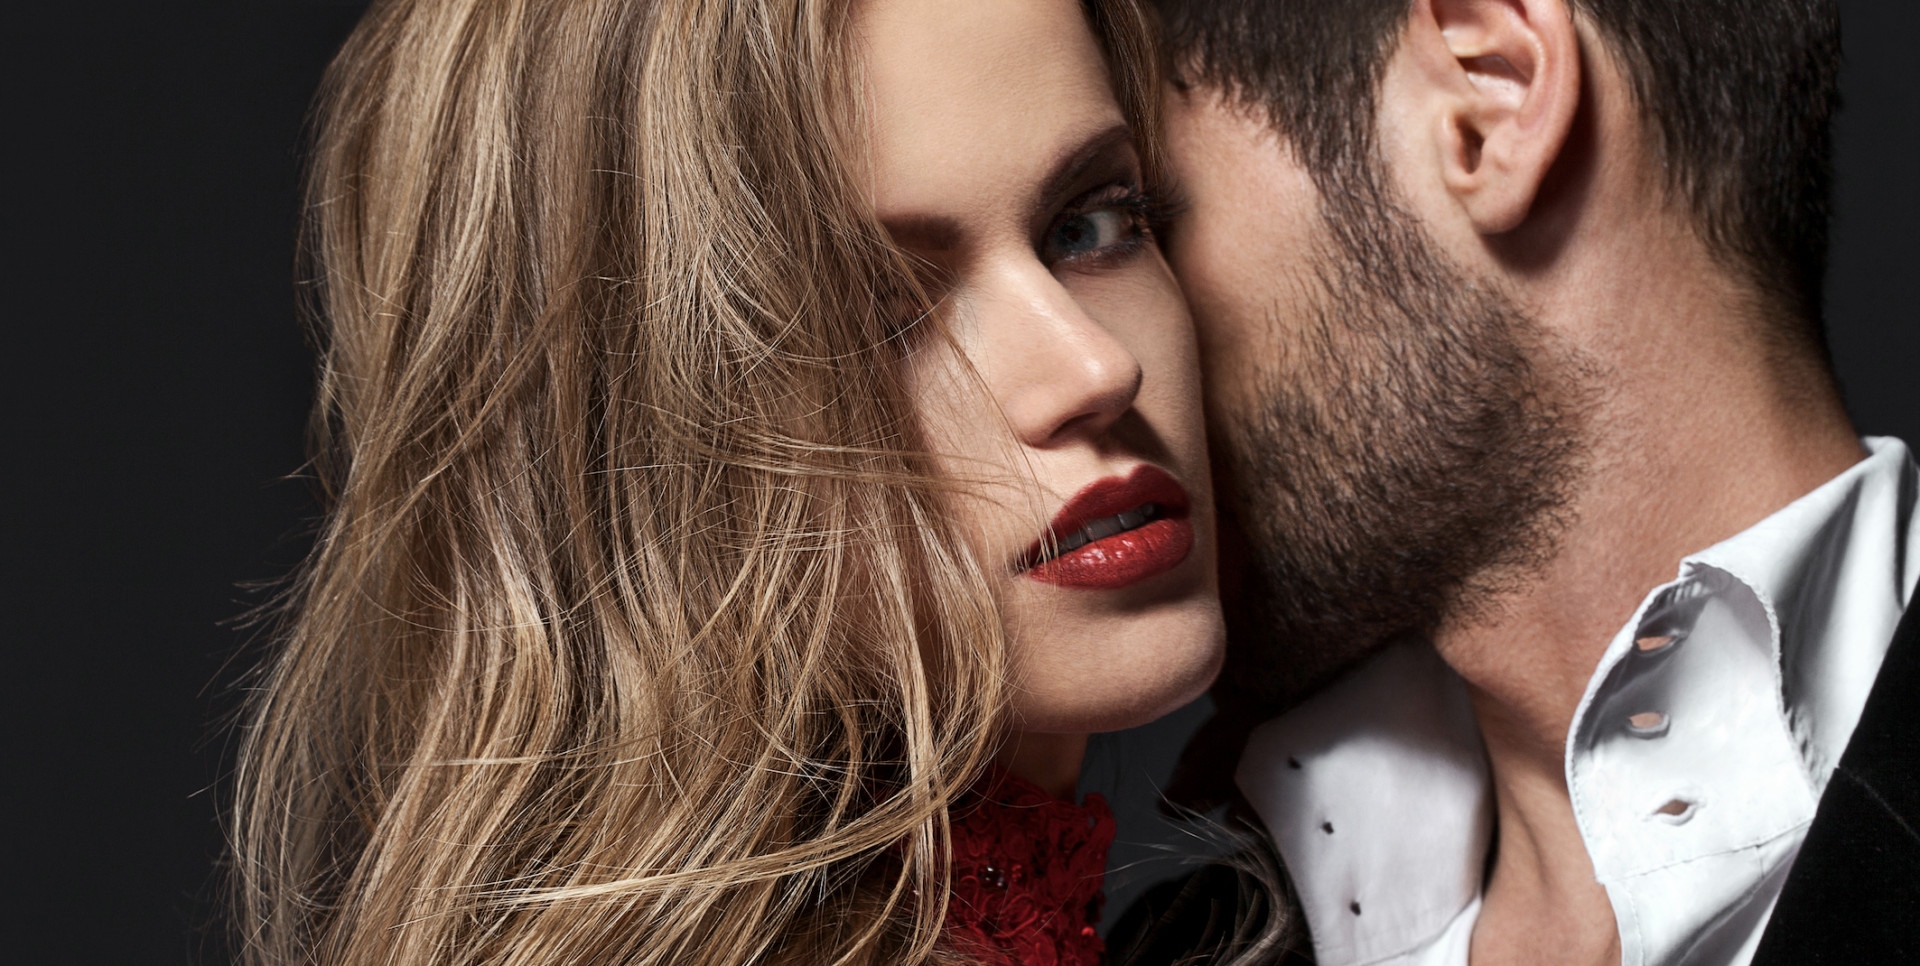 woman with red lipstick hugging man who whispers in her ear